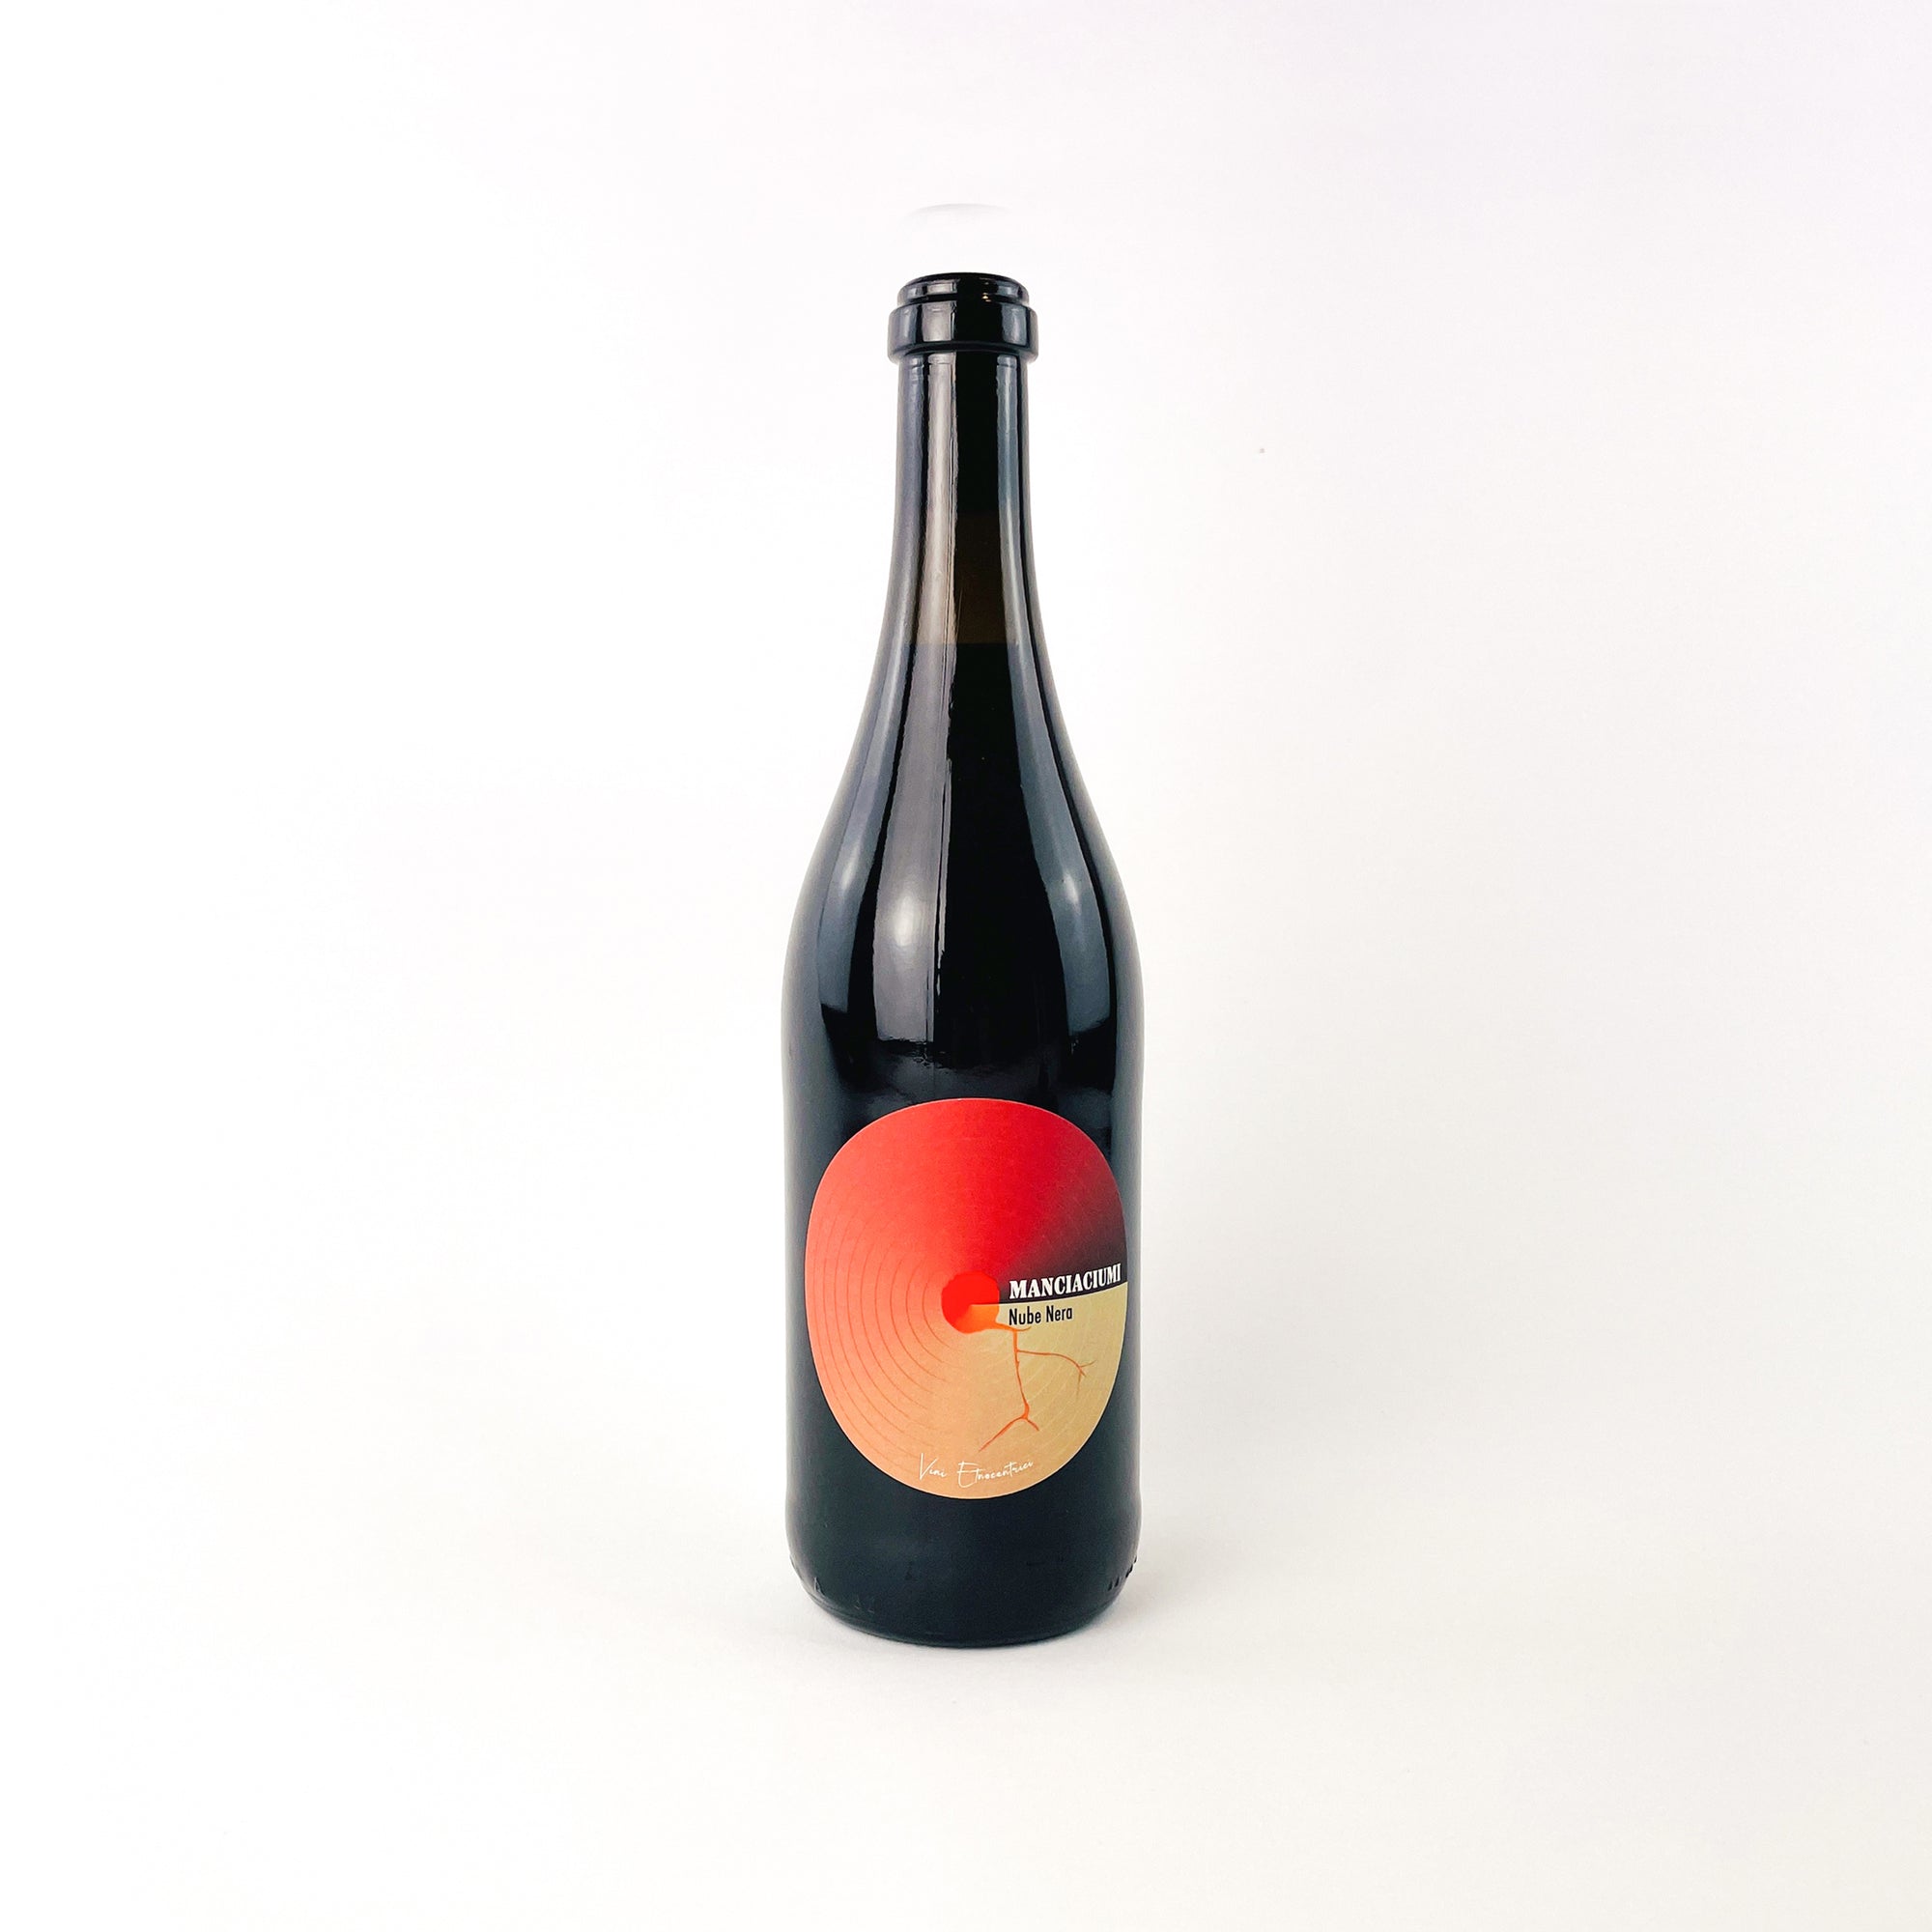 Manciaciumi Nube Nera red natural wine bottle front view